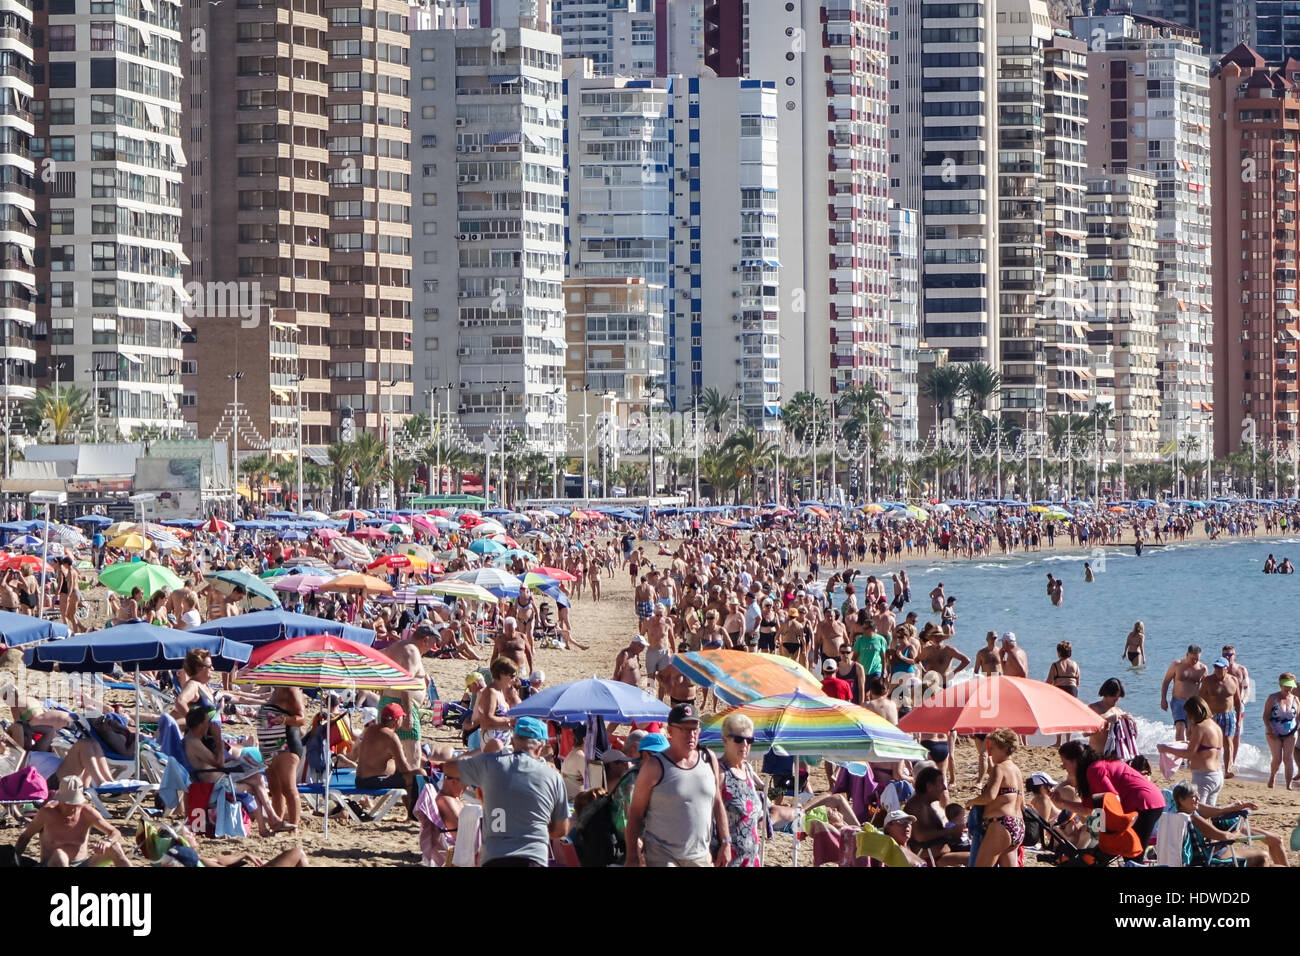 Crowded beach scene with mainly elderly men and women relaxing or exercising on the shoreline with skyscrapers in back Stock Photo